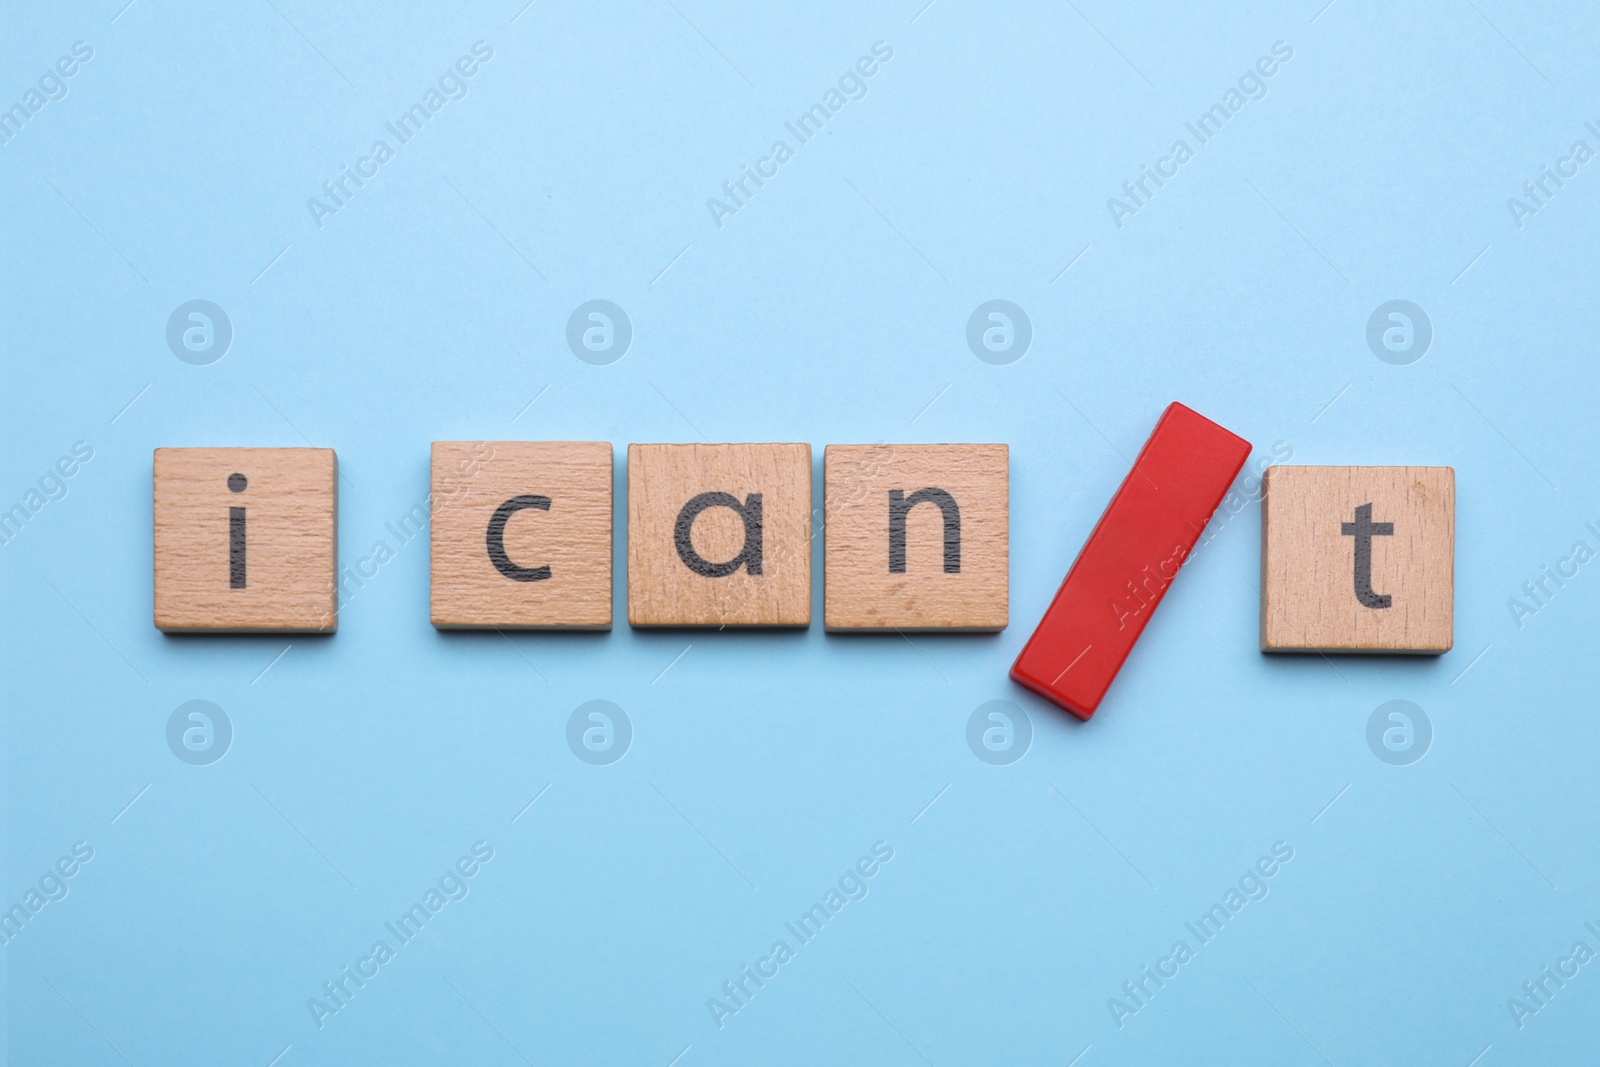 Photo of Motivation concept. Changing phrase from I Can't into I Can by adding slash symbol on light blue background, flat lay